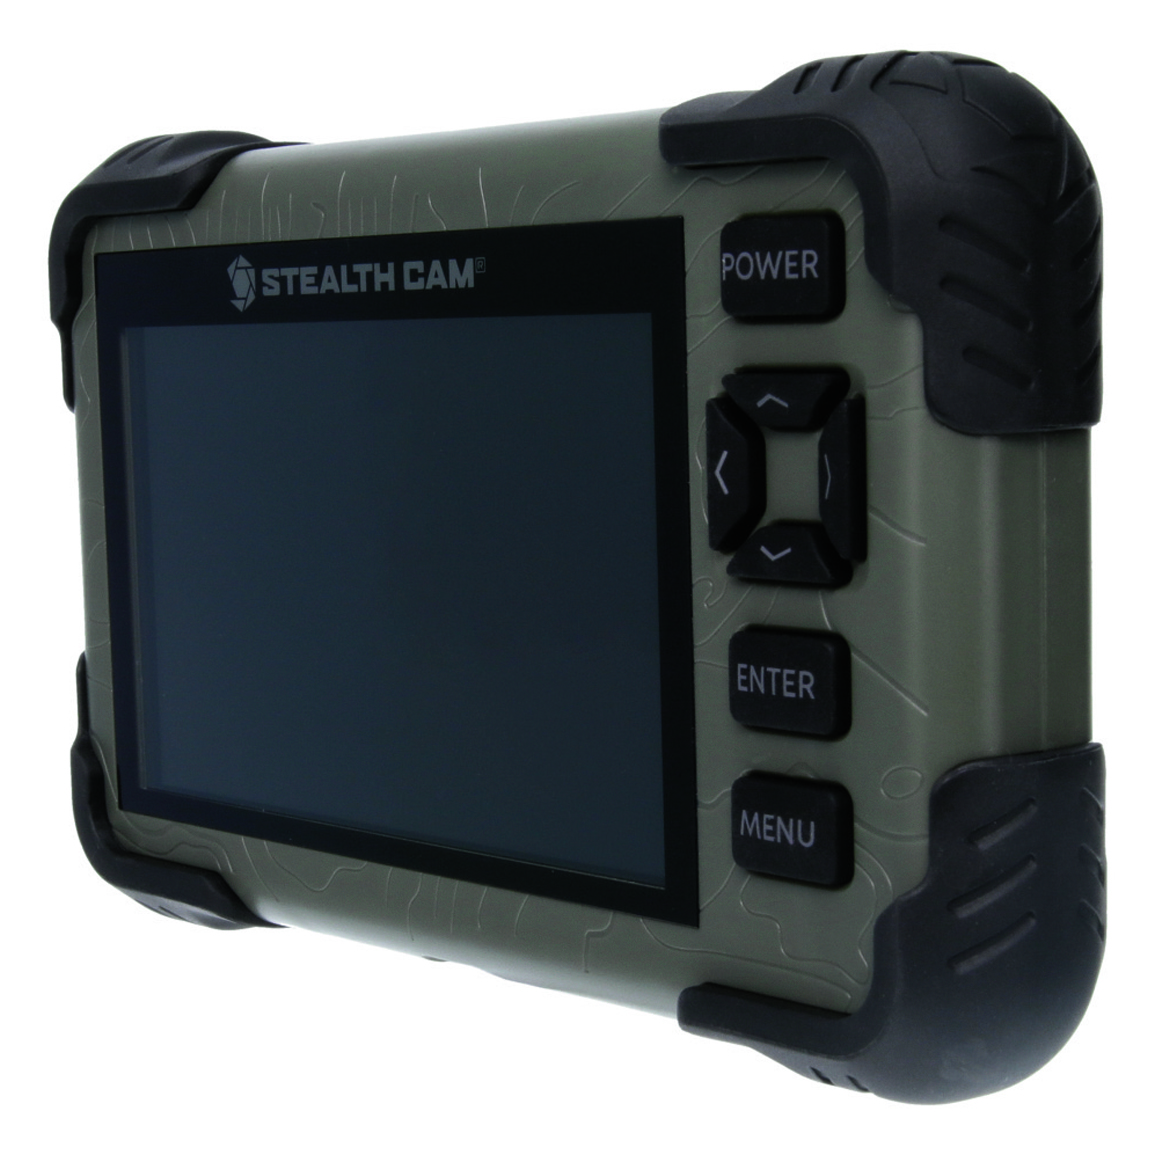 Stealth Cam SD Card Reader and Viewer with 4.3" LCD Screen